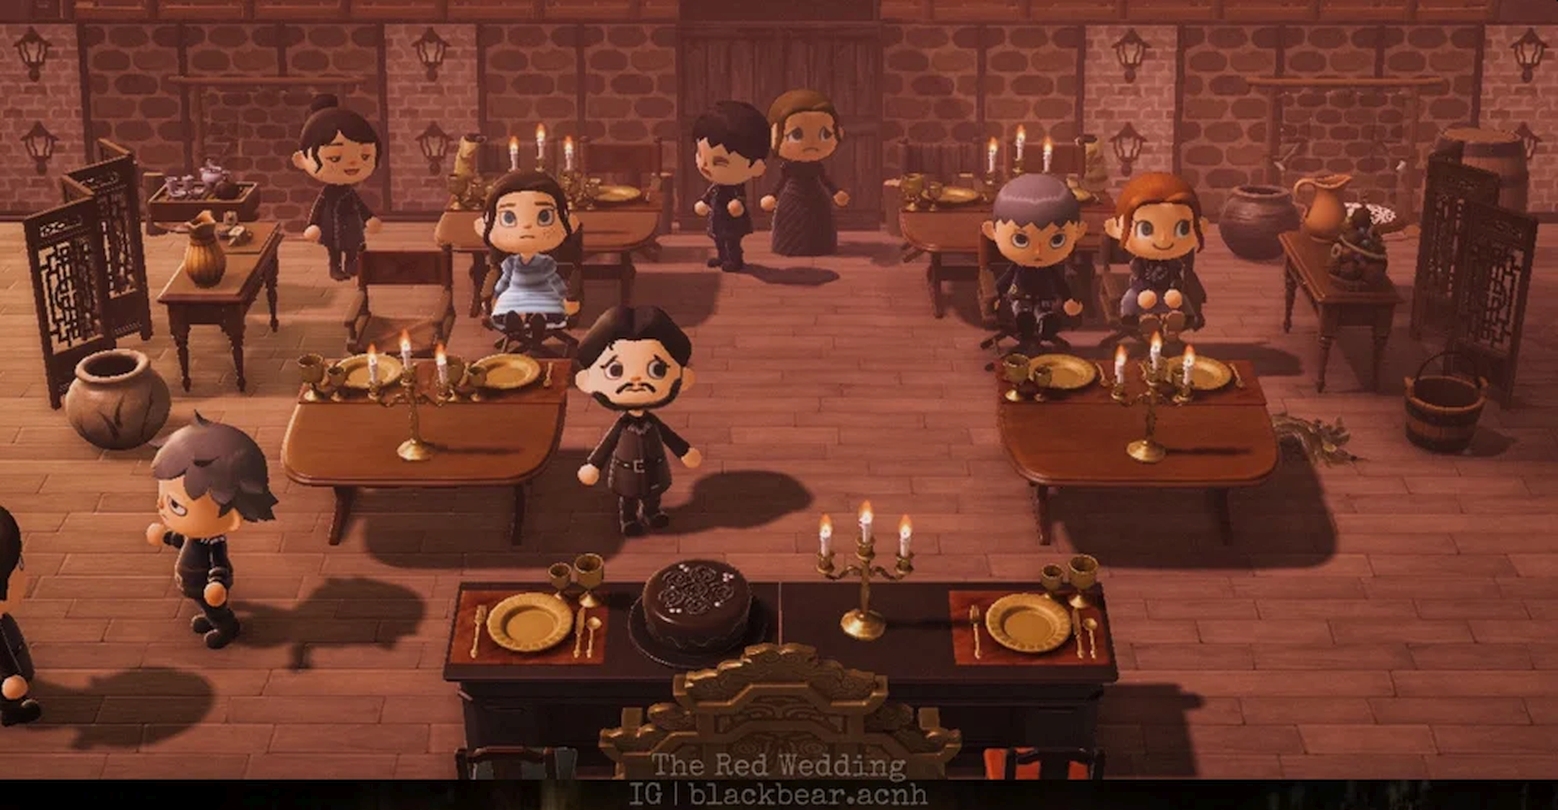 Game Of Thrones’ Red Wedding Scene Recreated In Animal Crossing: New Horizons